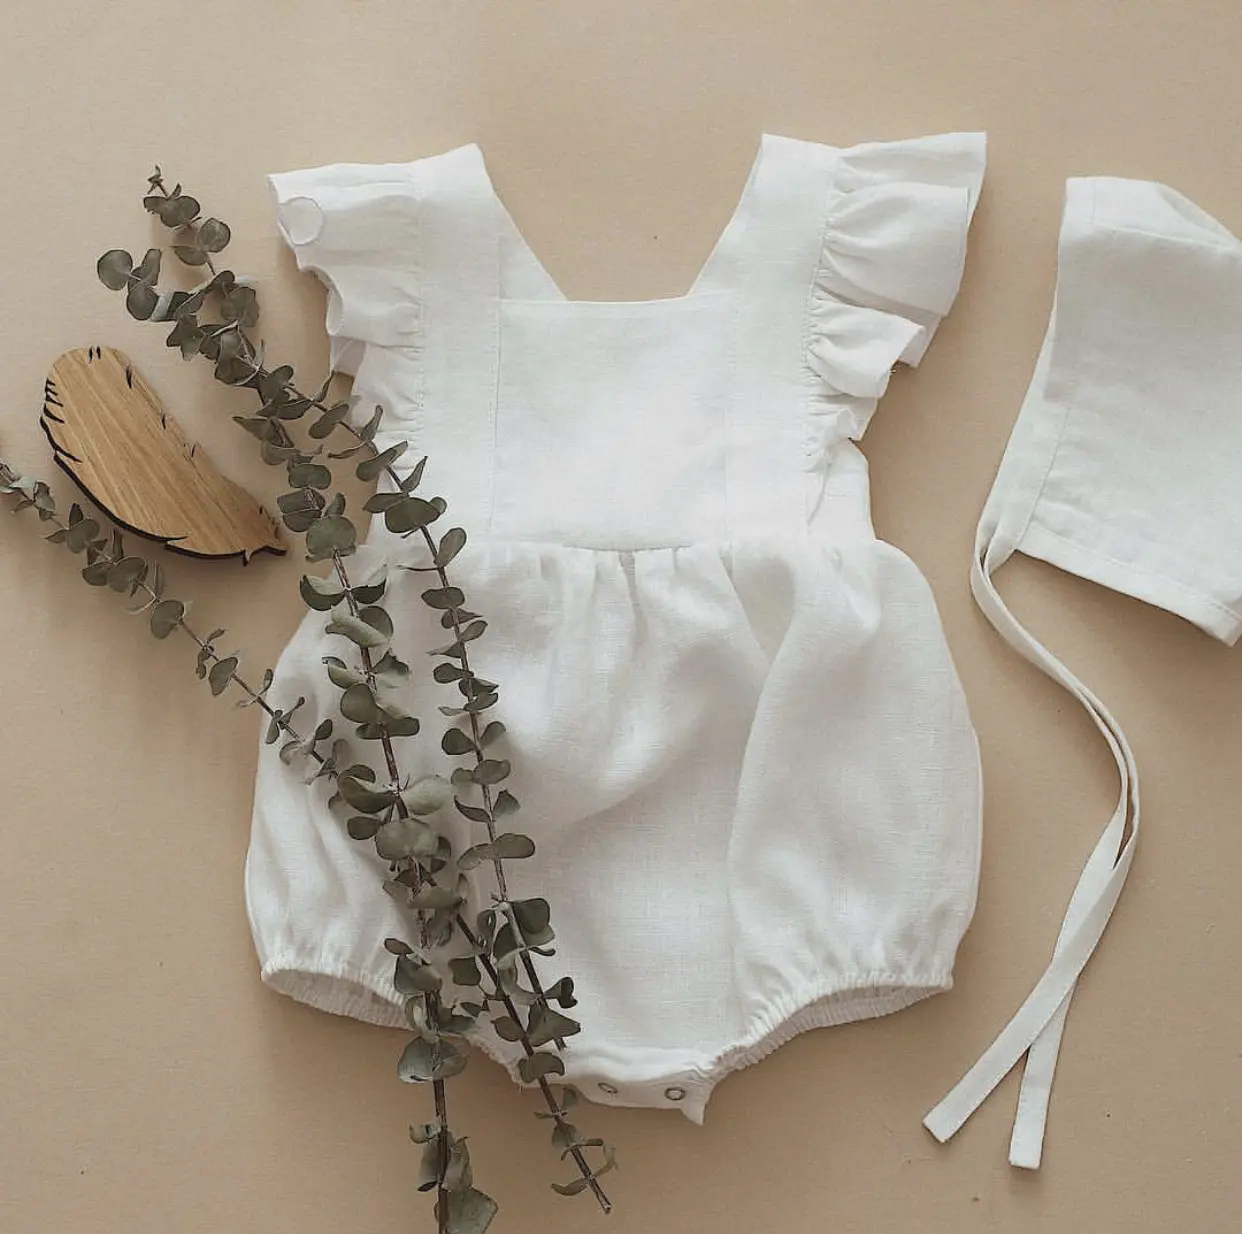 2022 Solid Color Summer Infant Baby Cotton Linen Flutter Sleeve Romper Backless Baby Girl Cotton Linen Bubble Romper With Snaps